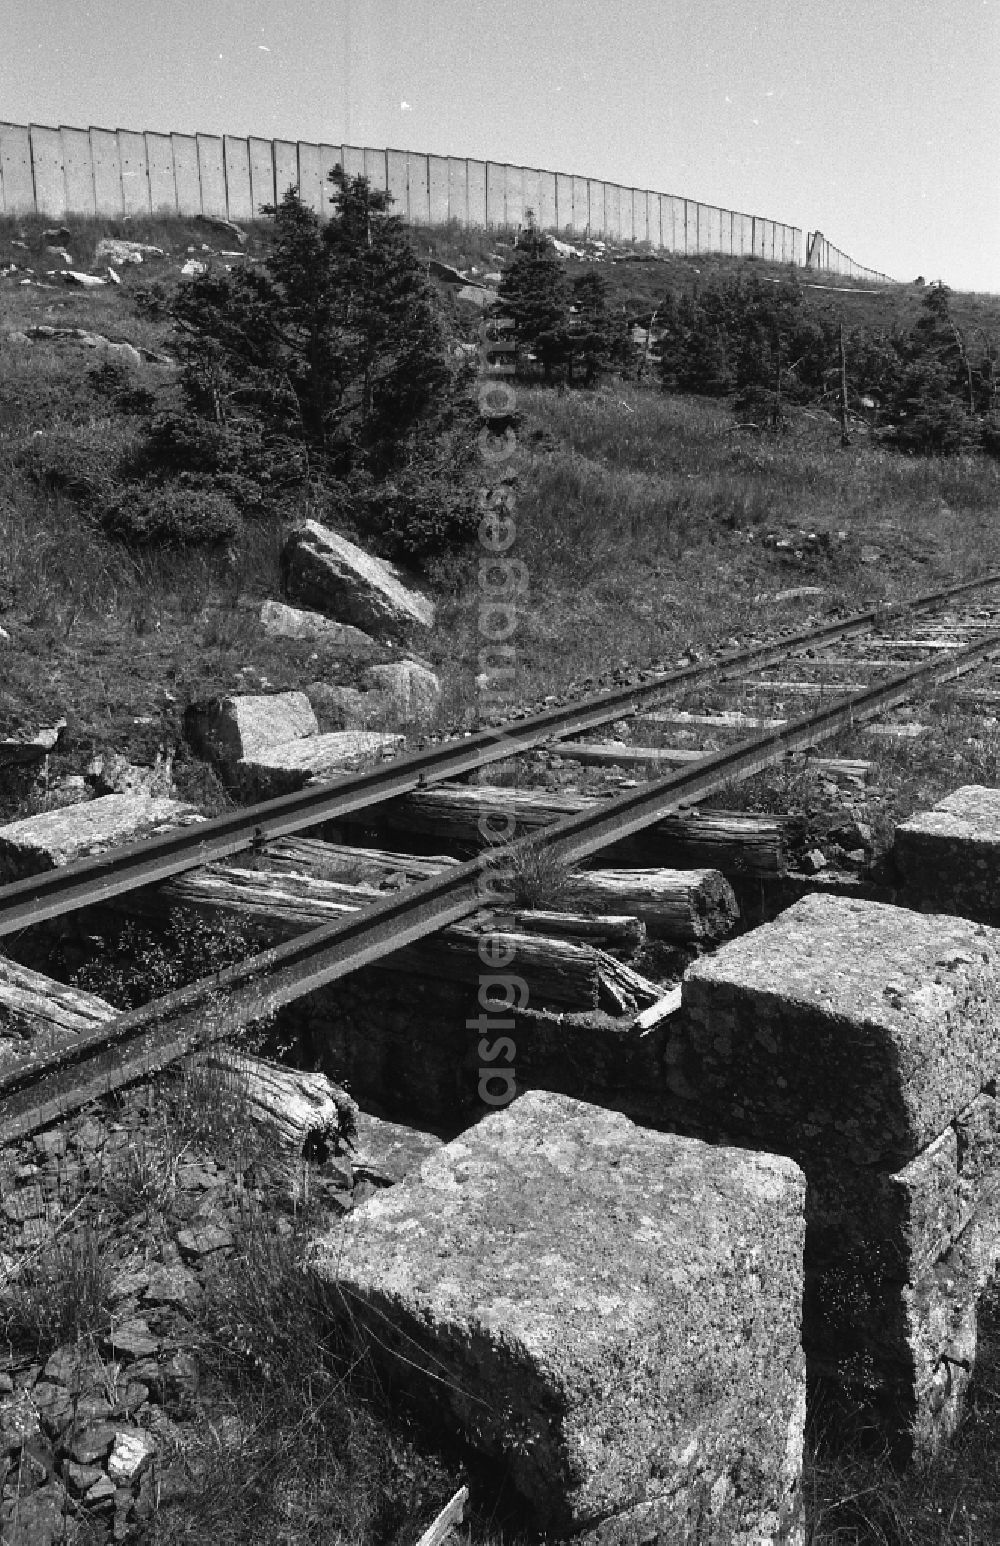 GDR image archive: Schierke - Neglected track layout and track systems on the railway line on the summit plateau of the Brocken after its release for civilian visitor traffic in Schierke in the Harz in the state of Saxony-Anhalt in the area of the former GDR, German Democratic Republic